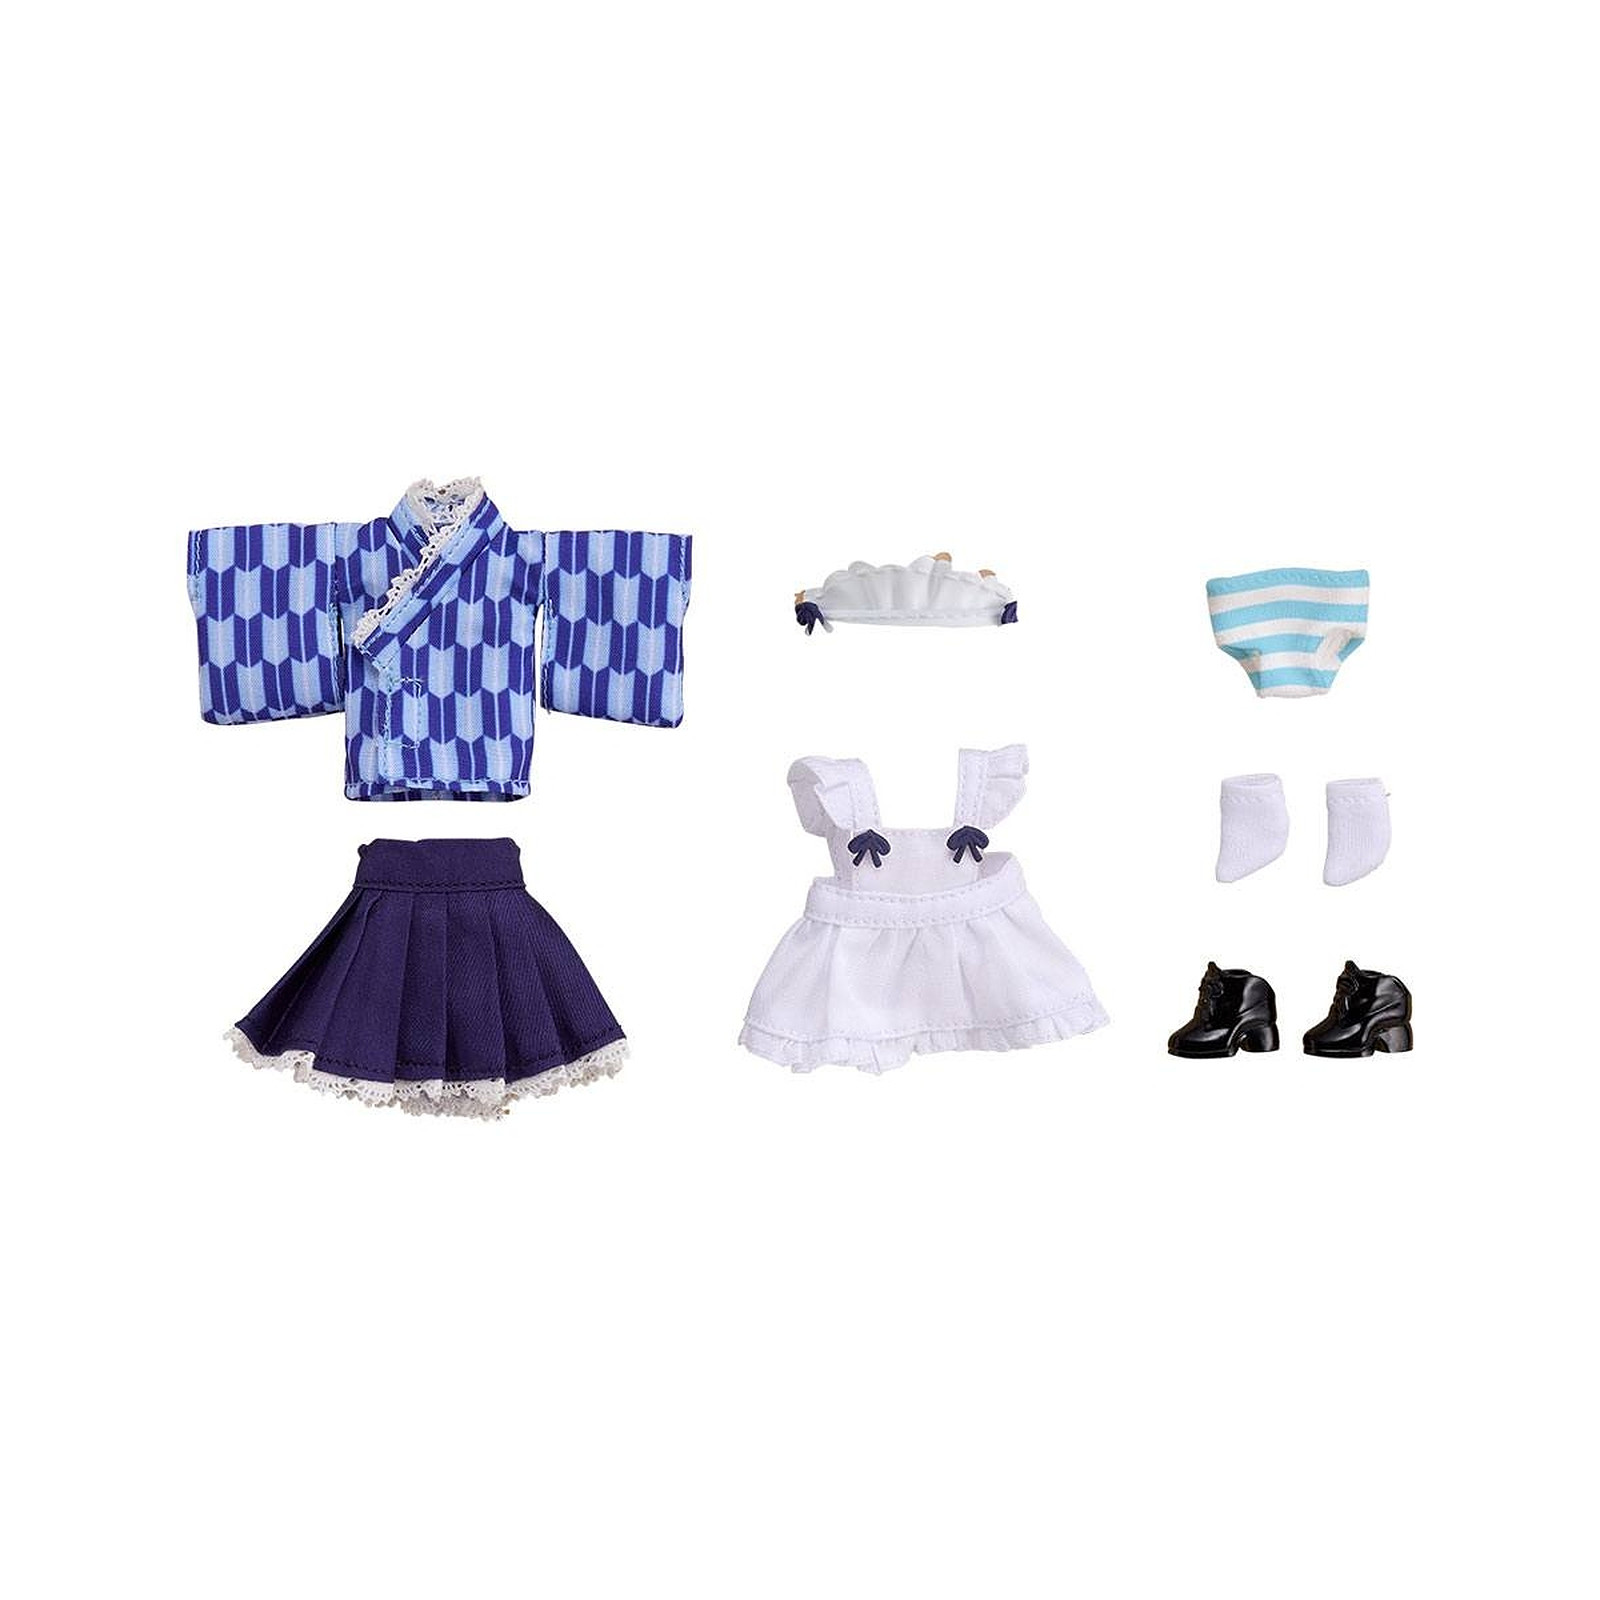 Original Character - Accessoires pour figurines Nendoroid Doll Outfit Set Japanese-Style Maid B - Figurines Good Smile Company